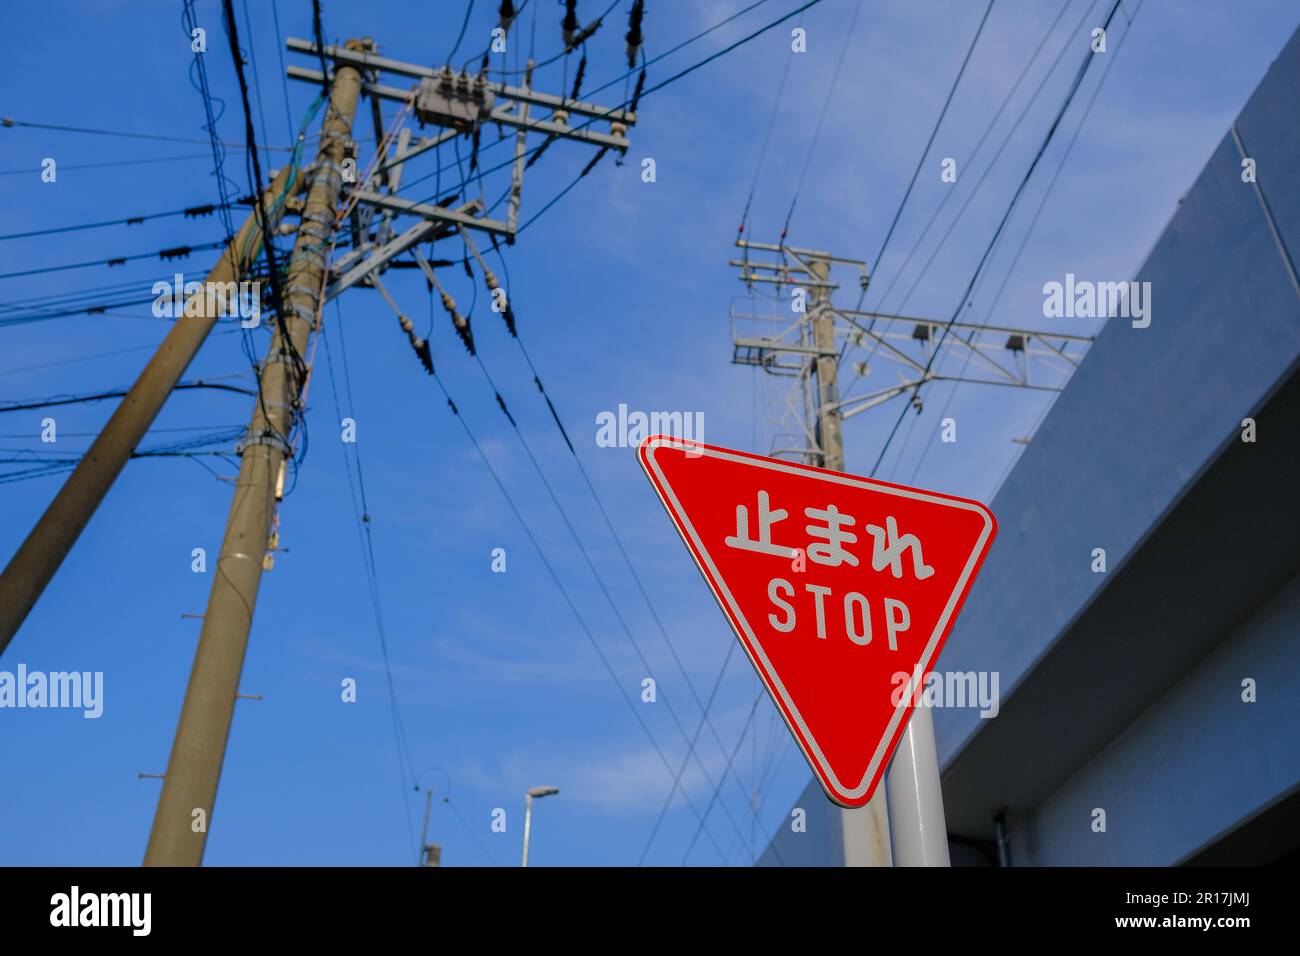 Traffic Stop Sign in both English and Japanese against a blue sky, with electricity poles in the background. Stock Photo